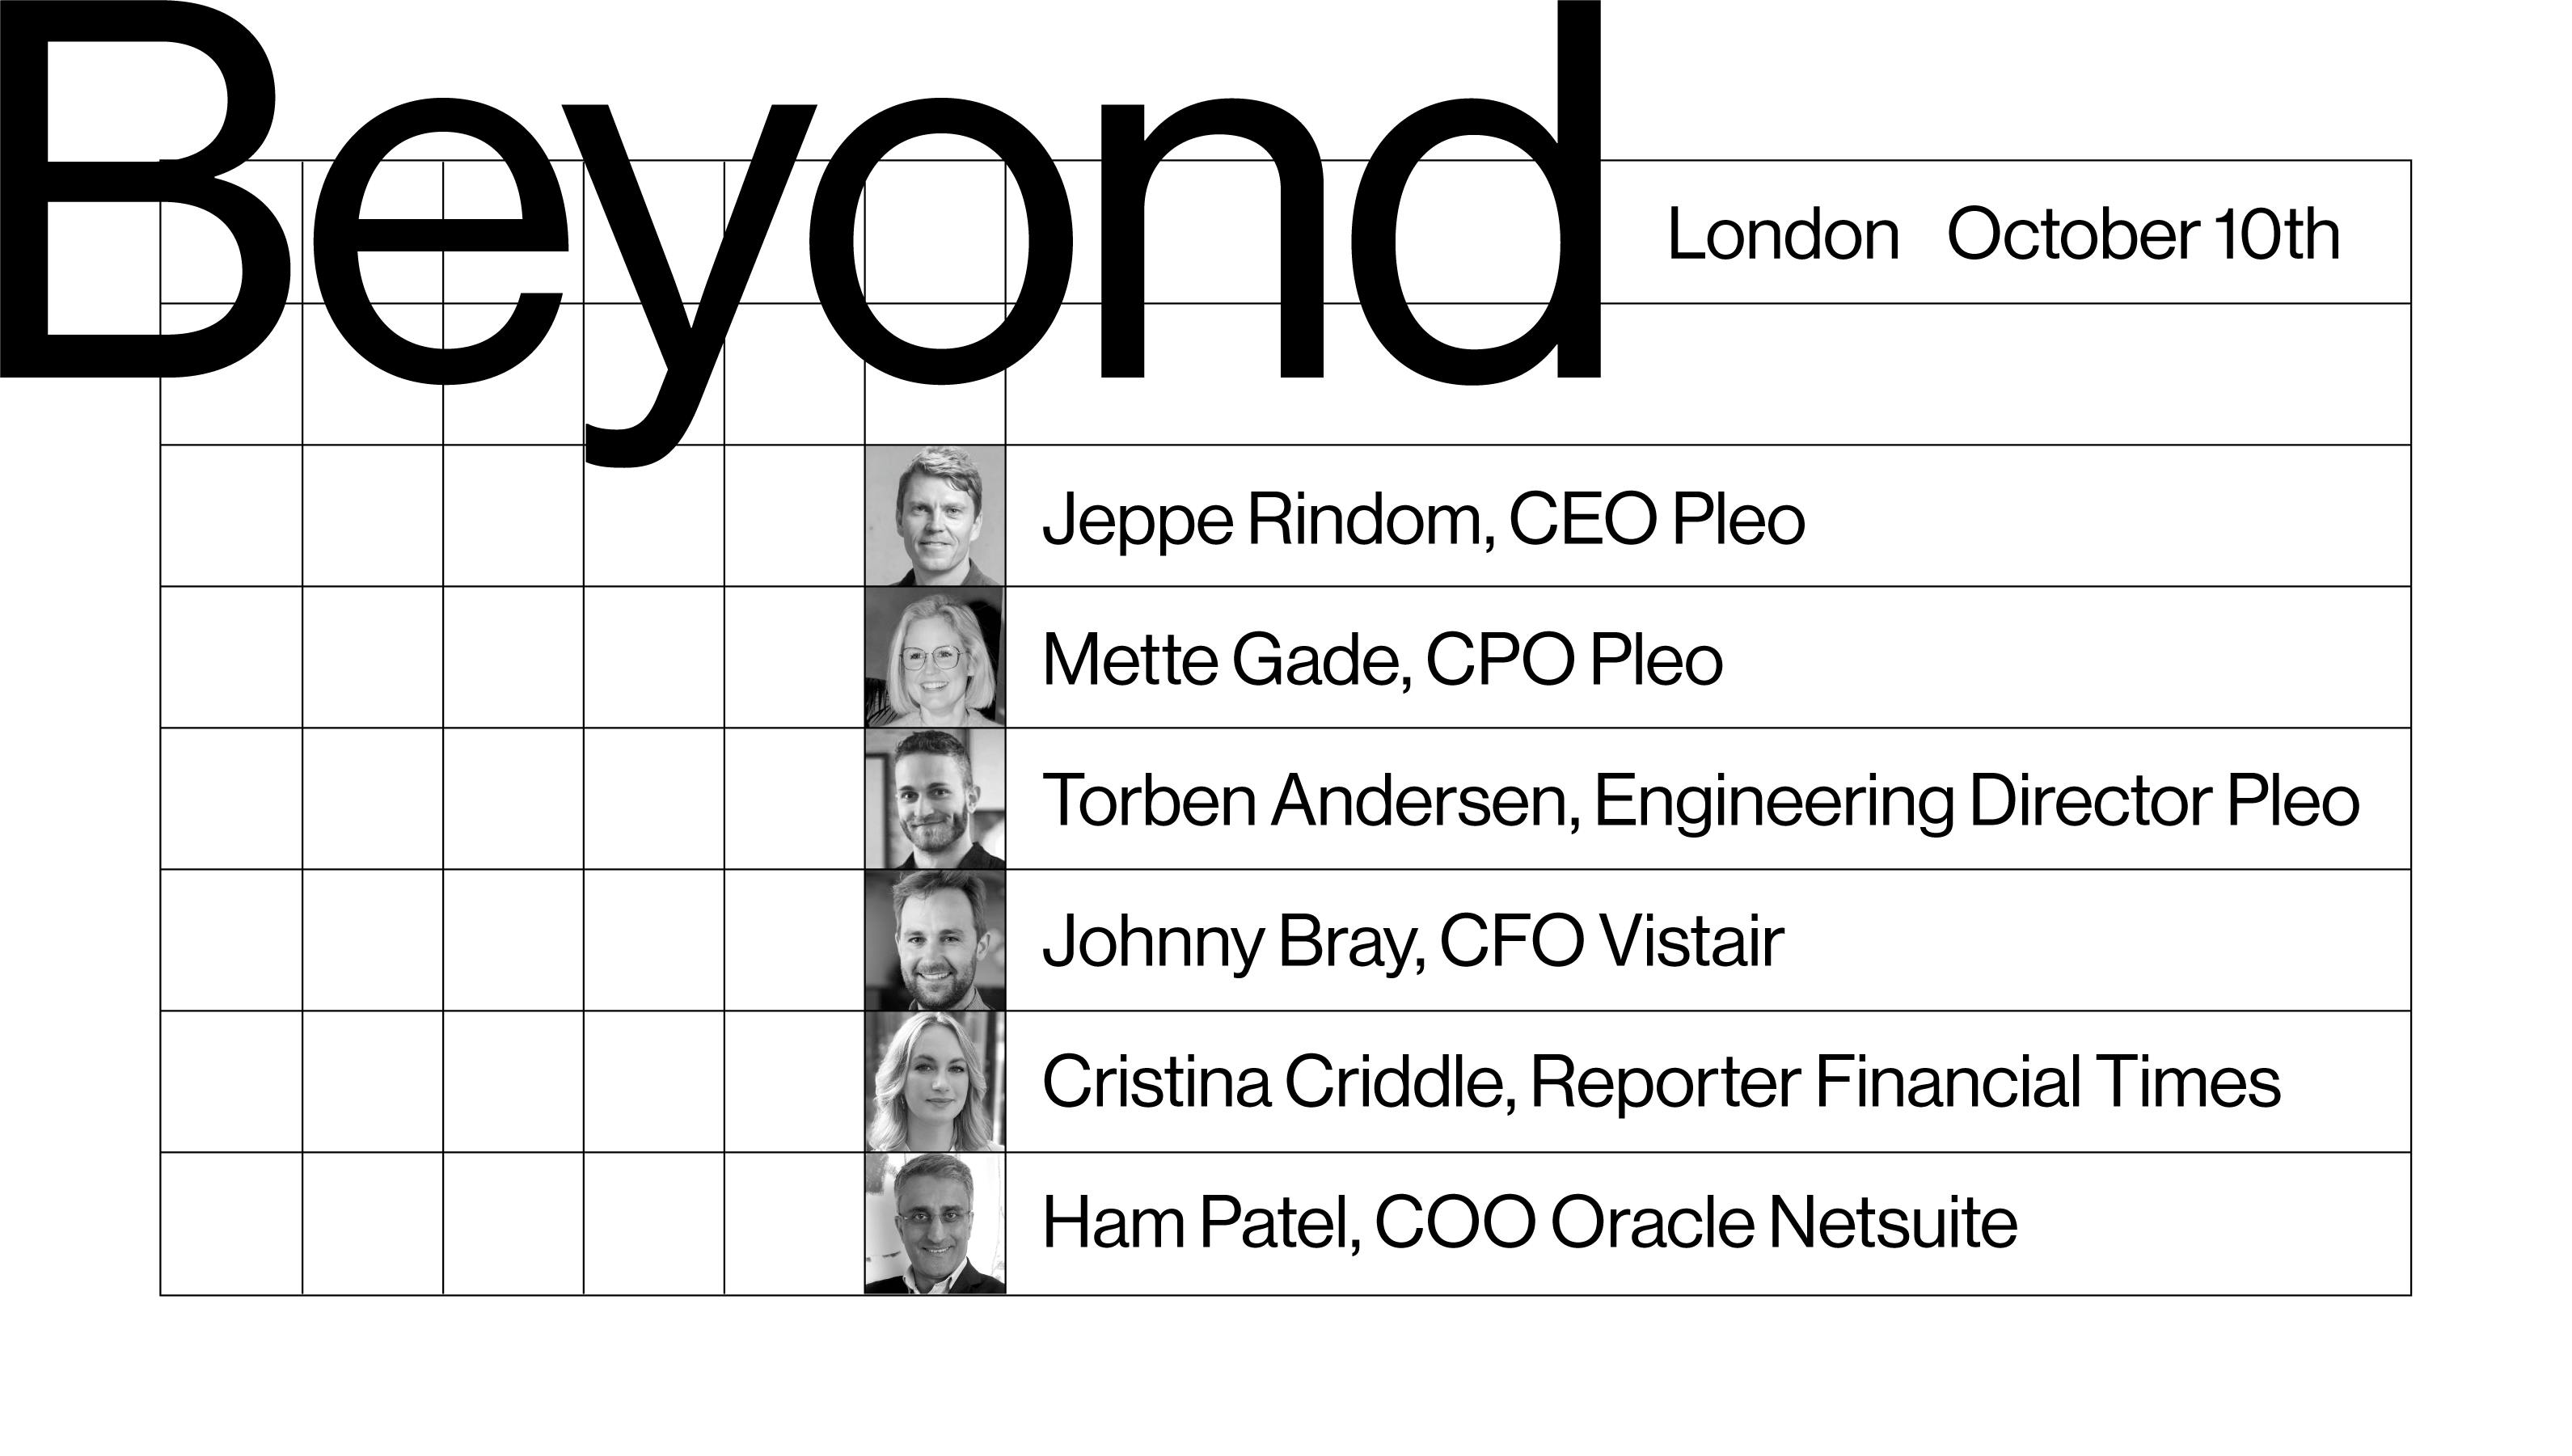 The speakers attending our Beyond event in London